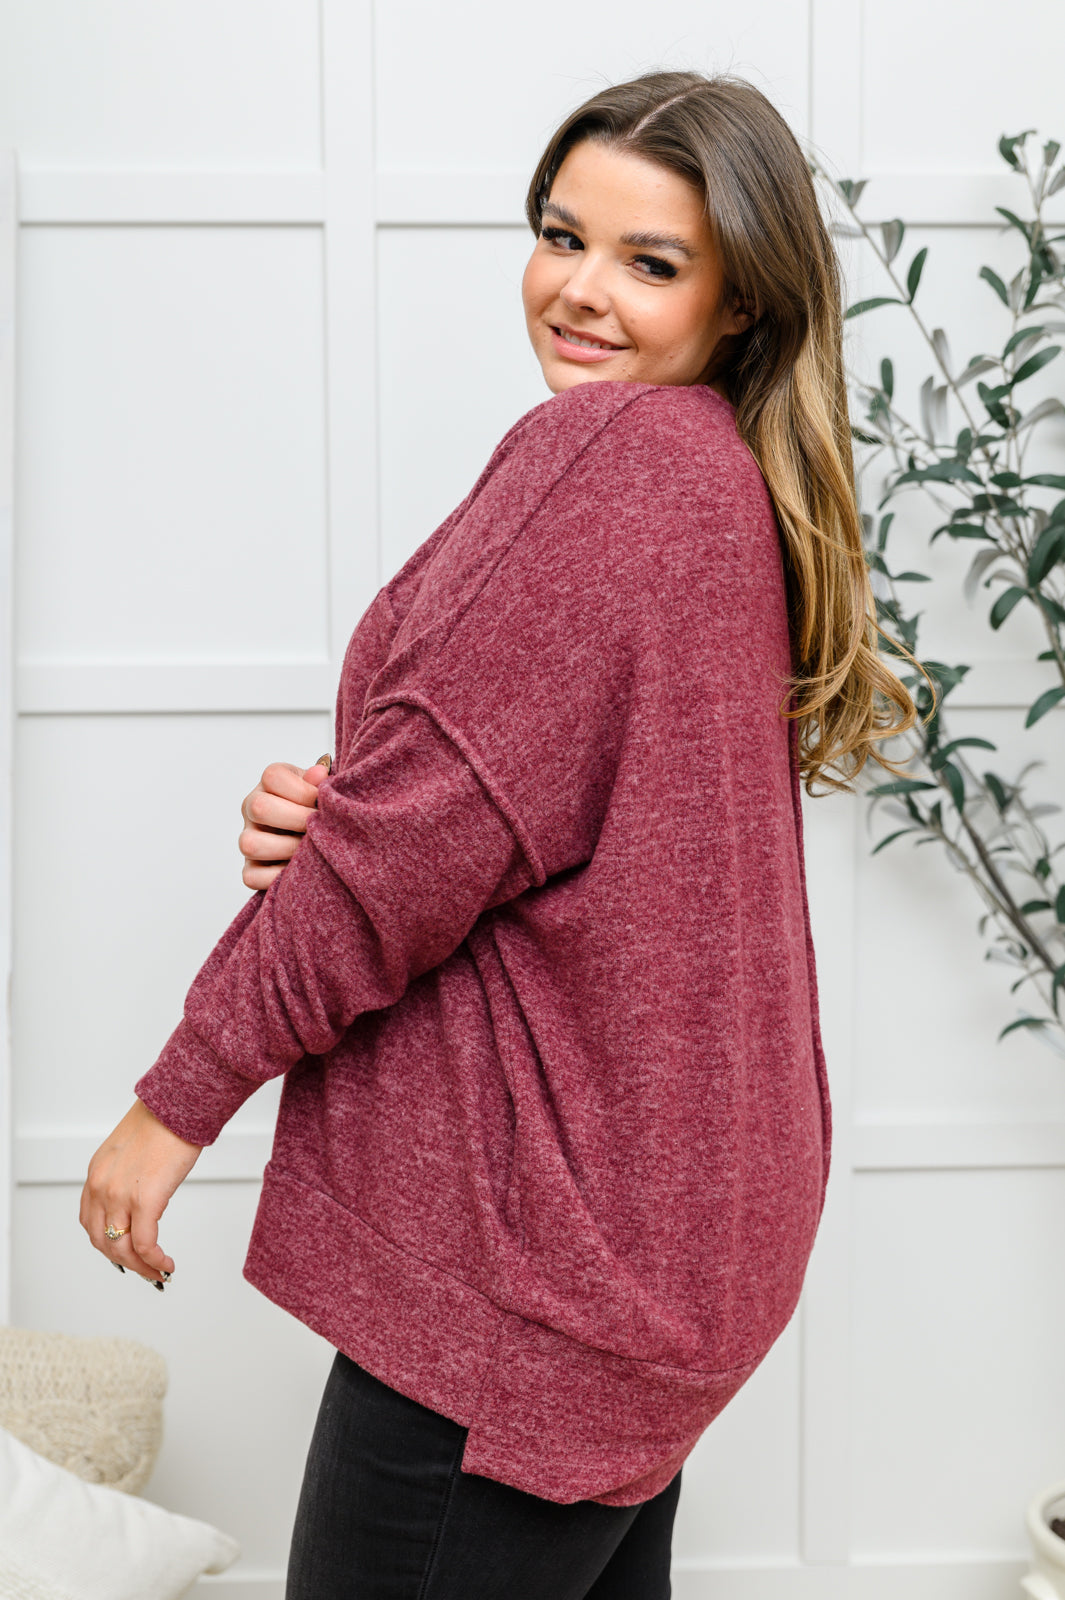 Brushed Soft Sweater In Burgundy - 11/25/2022